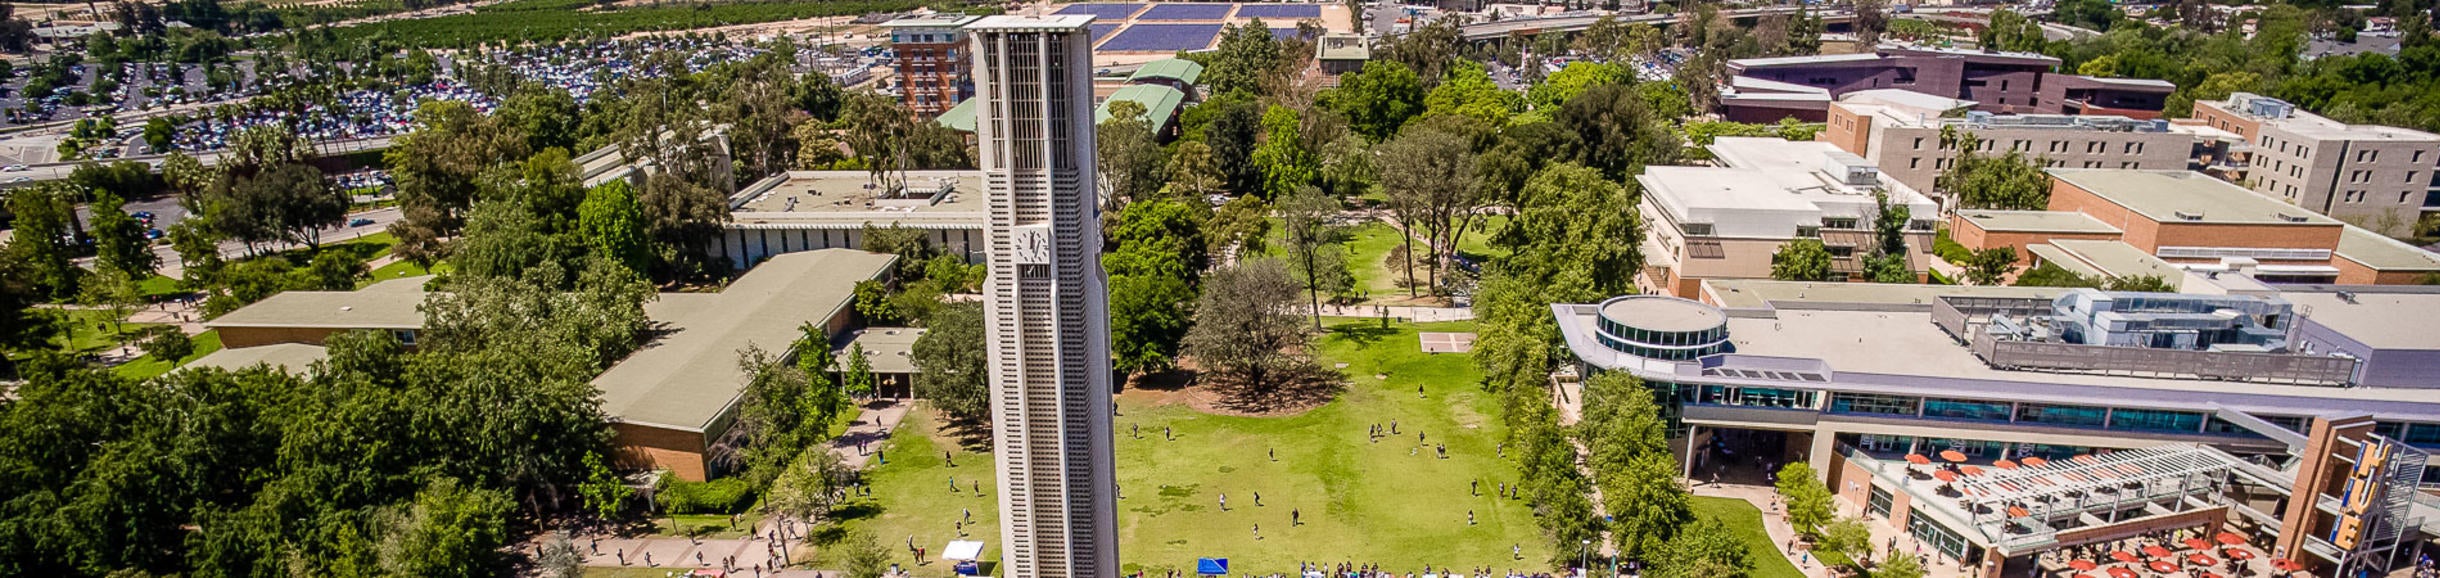 UCR aerial view